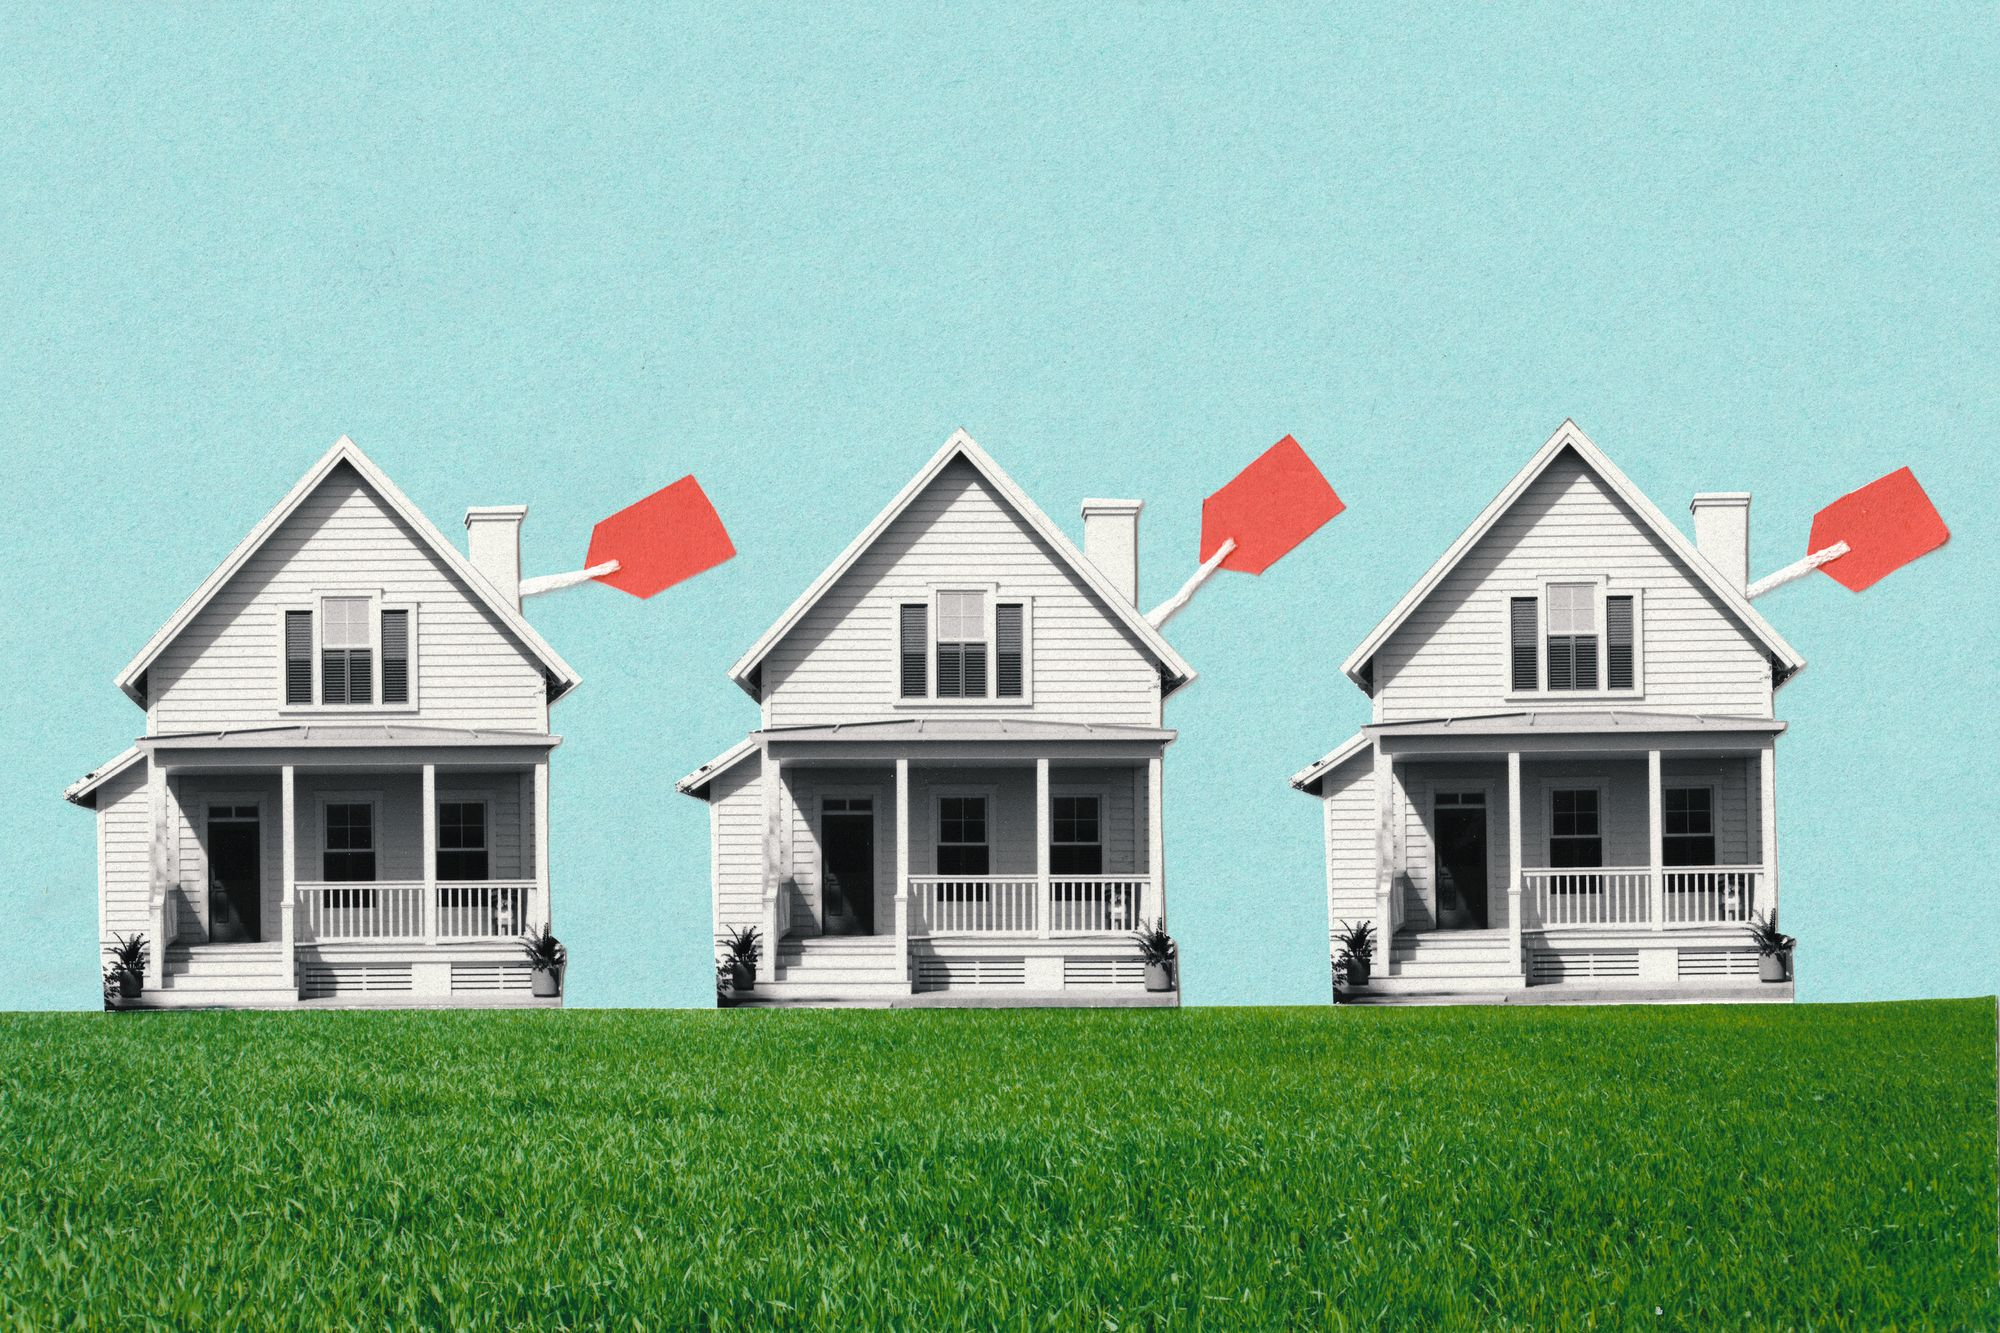 Sell Your Home Now: Why Cash Buyers Beat Wall Street